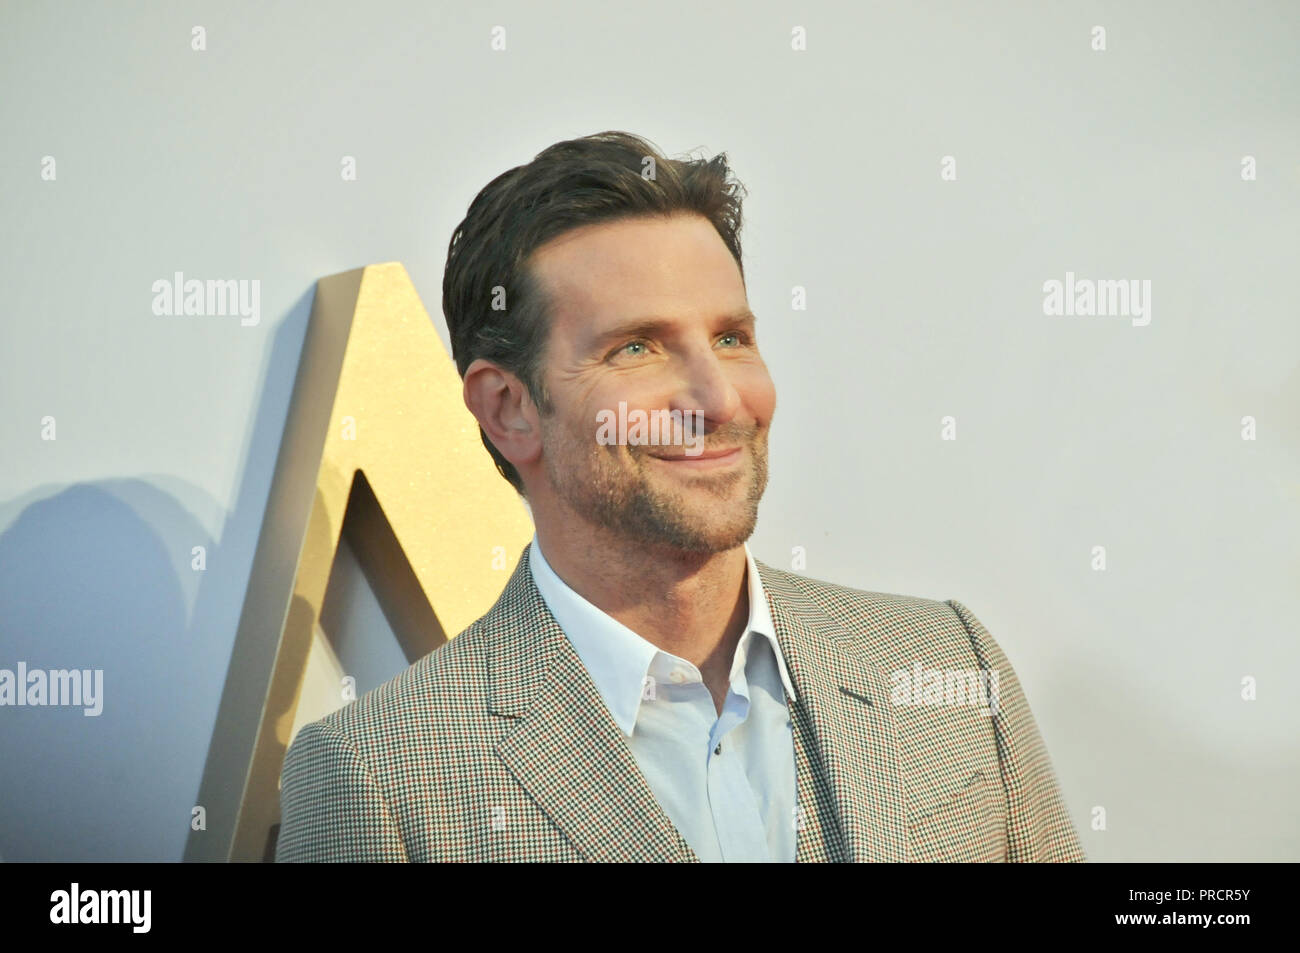 Actor, producer and director of A Star is Born, Bradley Cooper, at the London film premiere of his film. Stock Photo